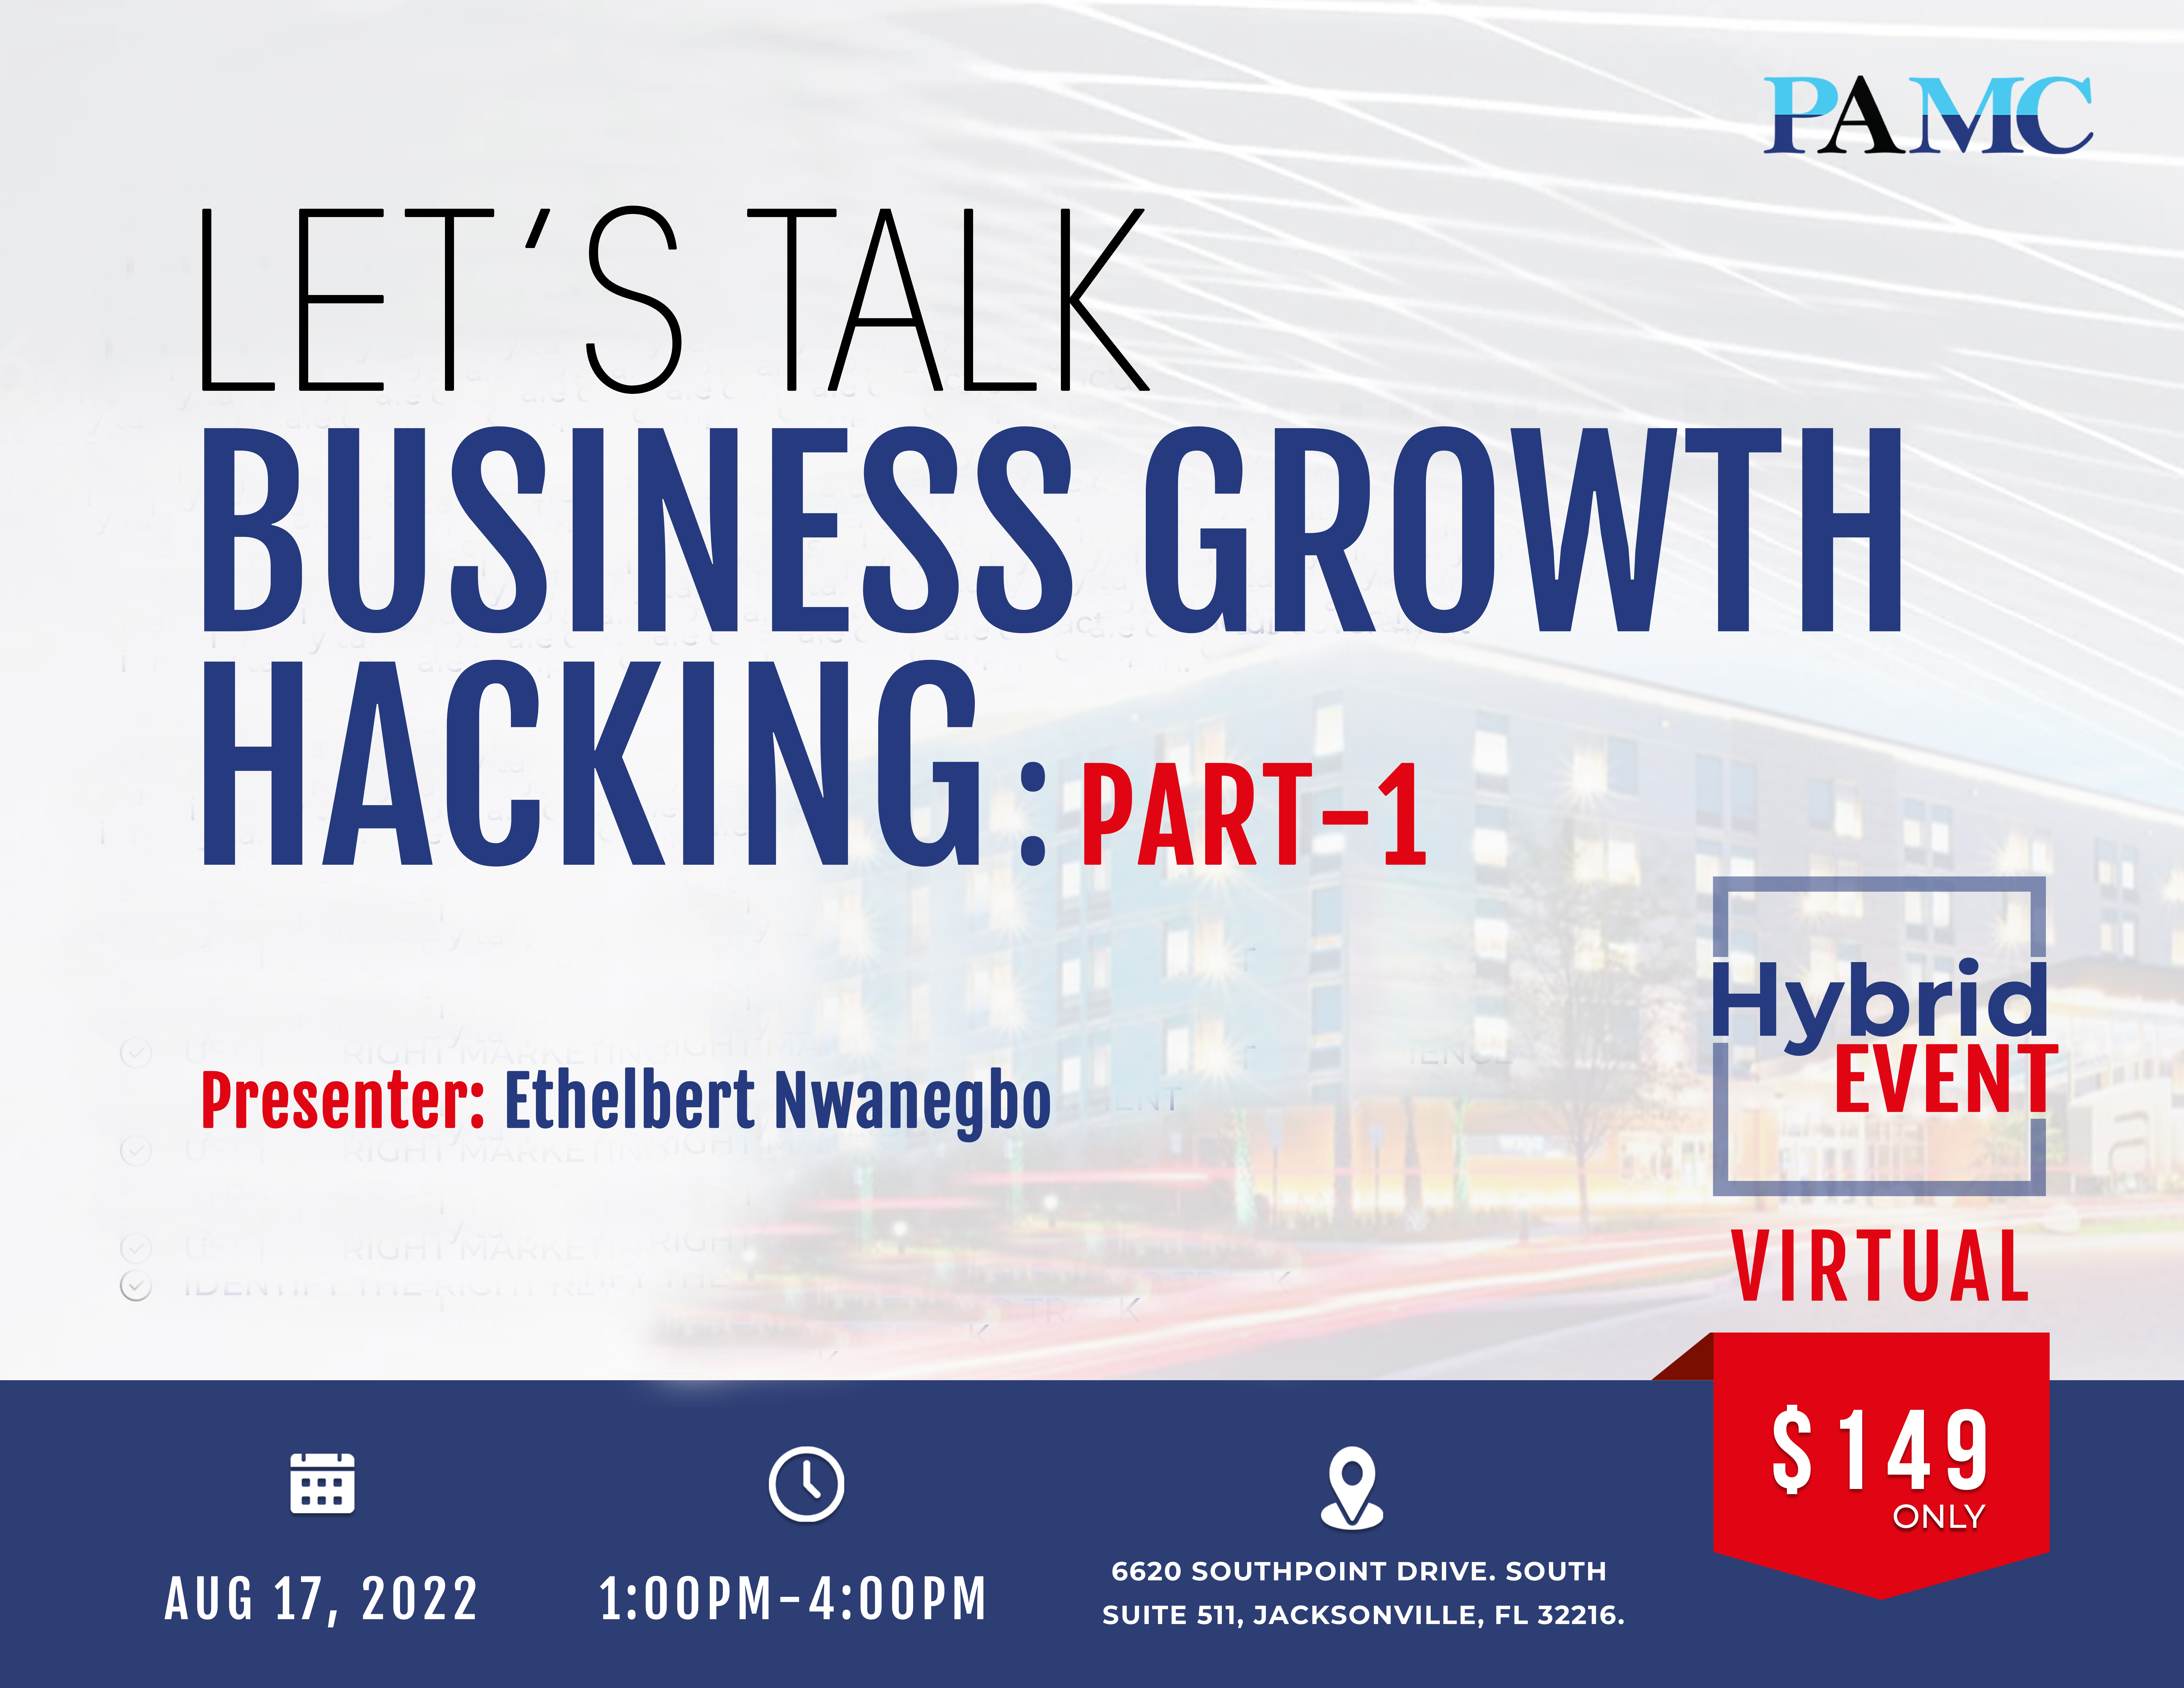 Business Growth Hacking flyer